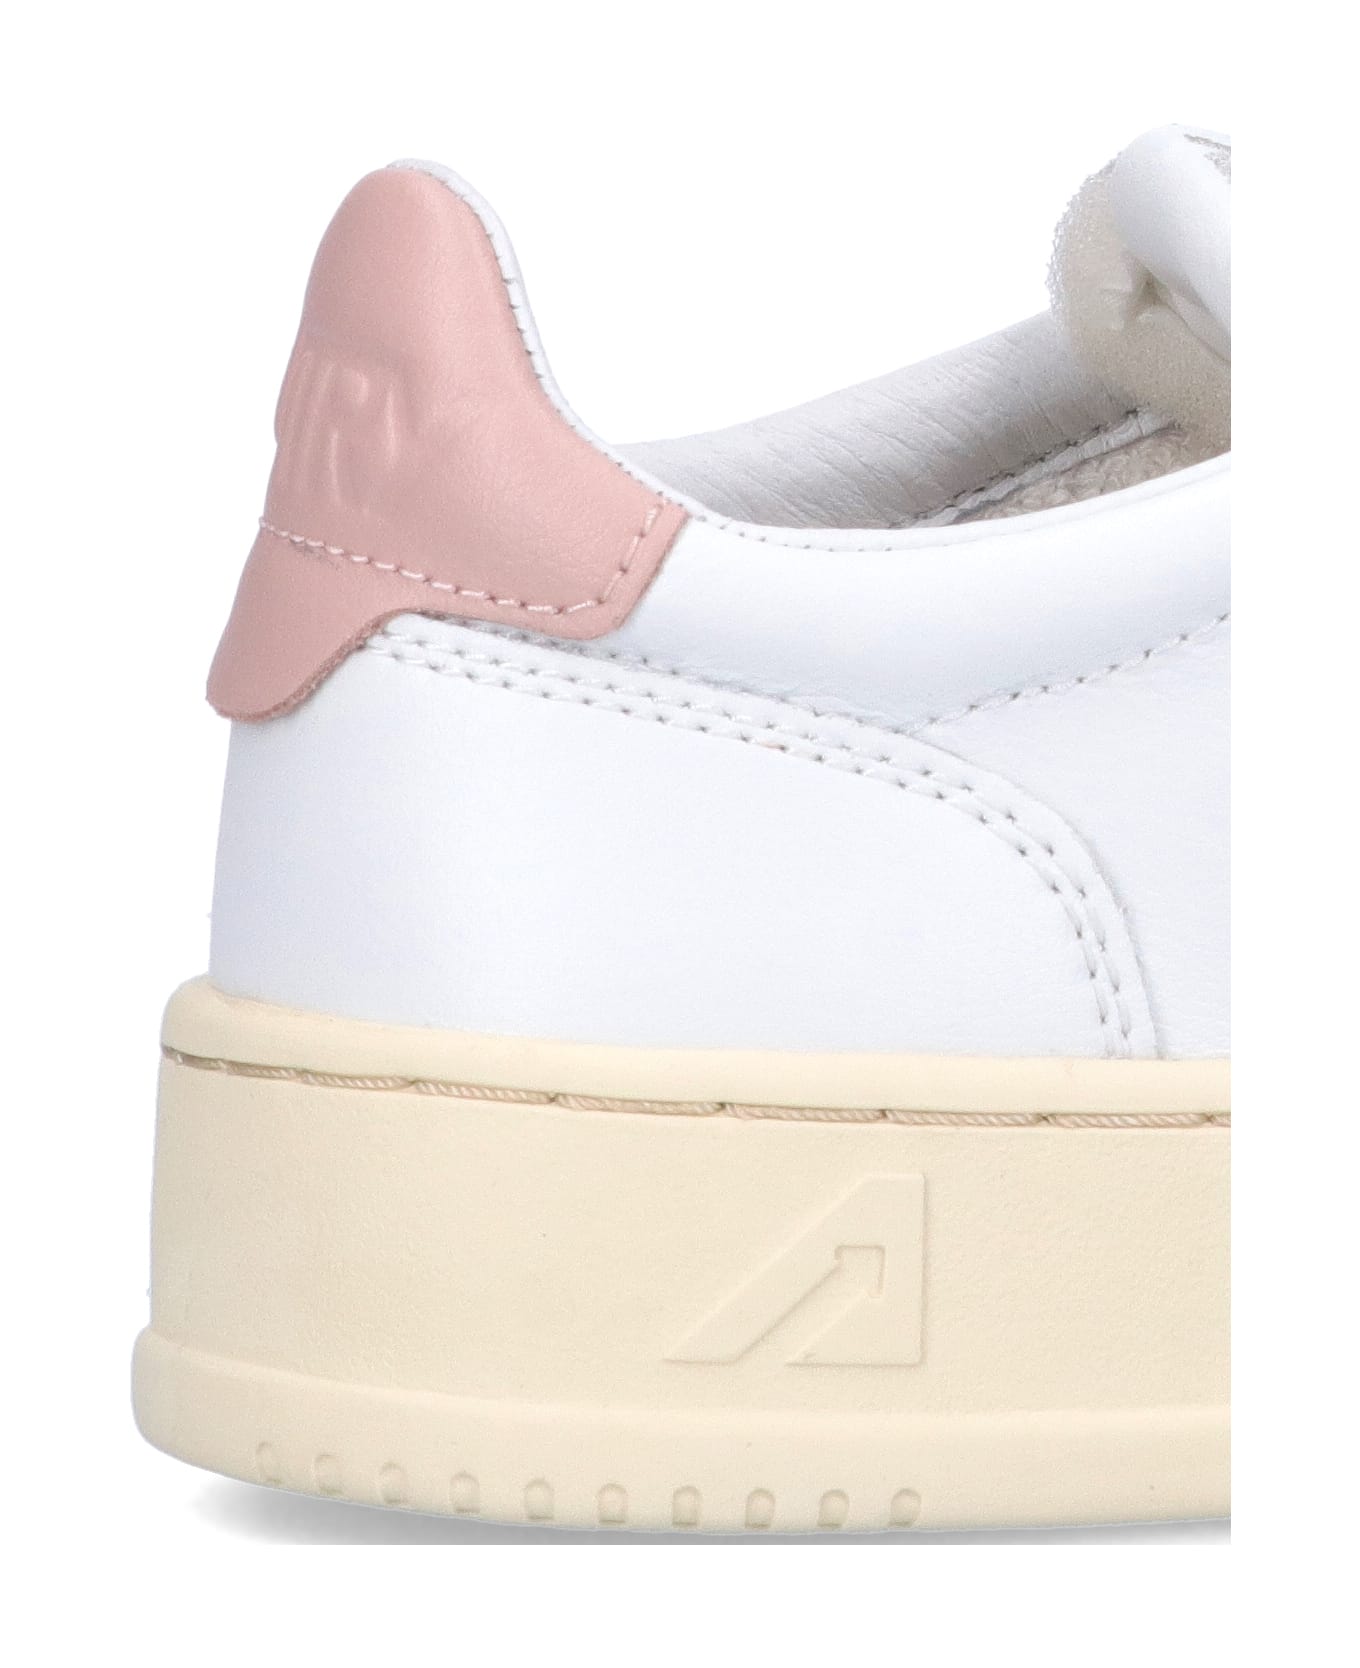 Autry 'medalist 01' Low Sneakers - Wht/pink